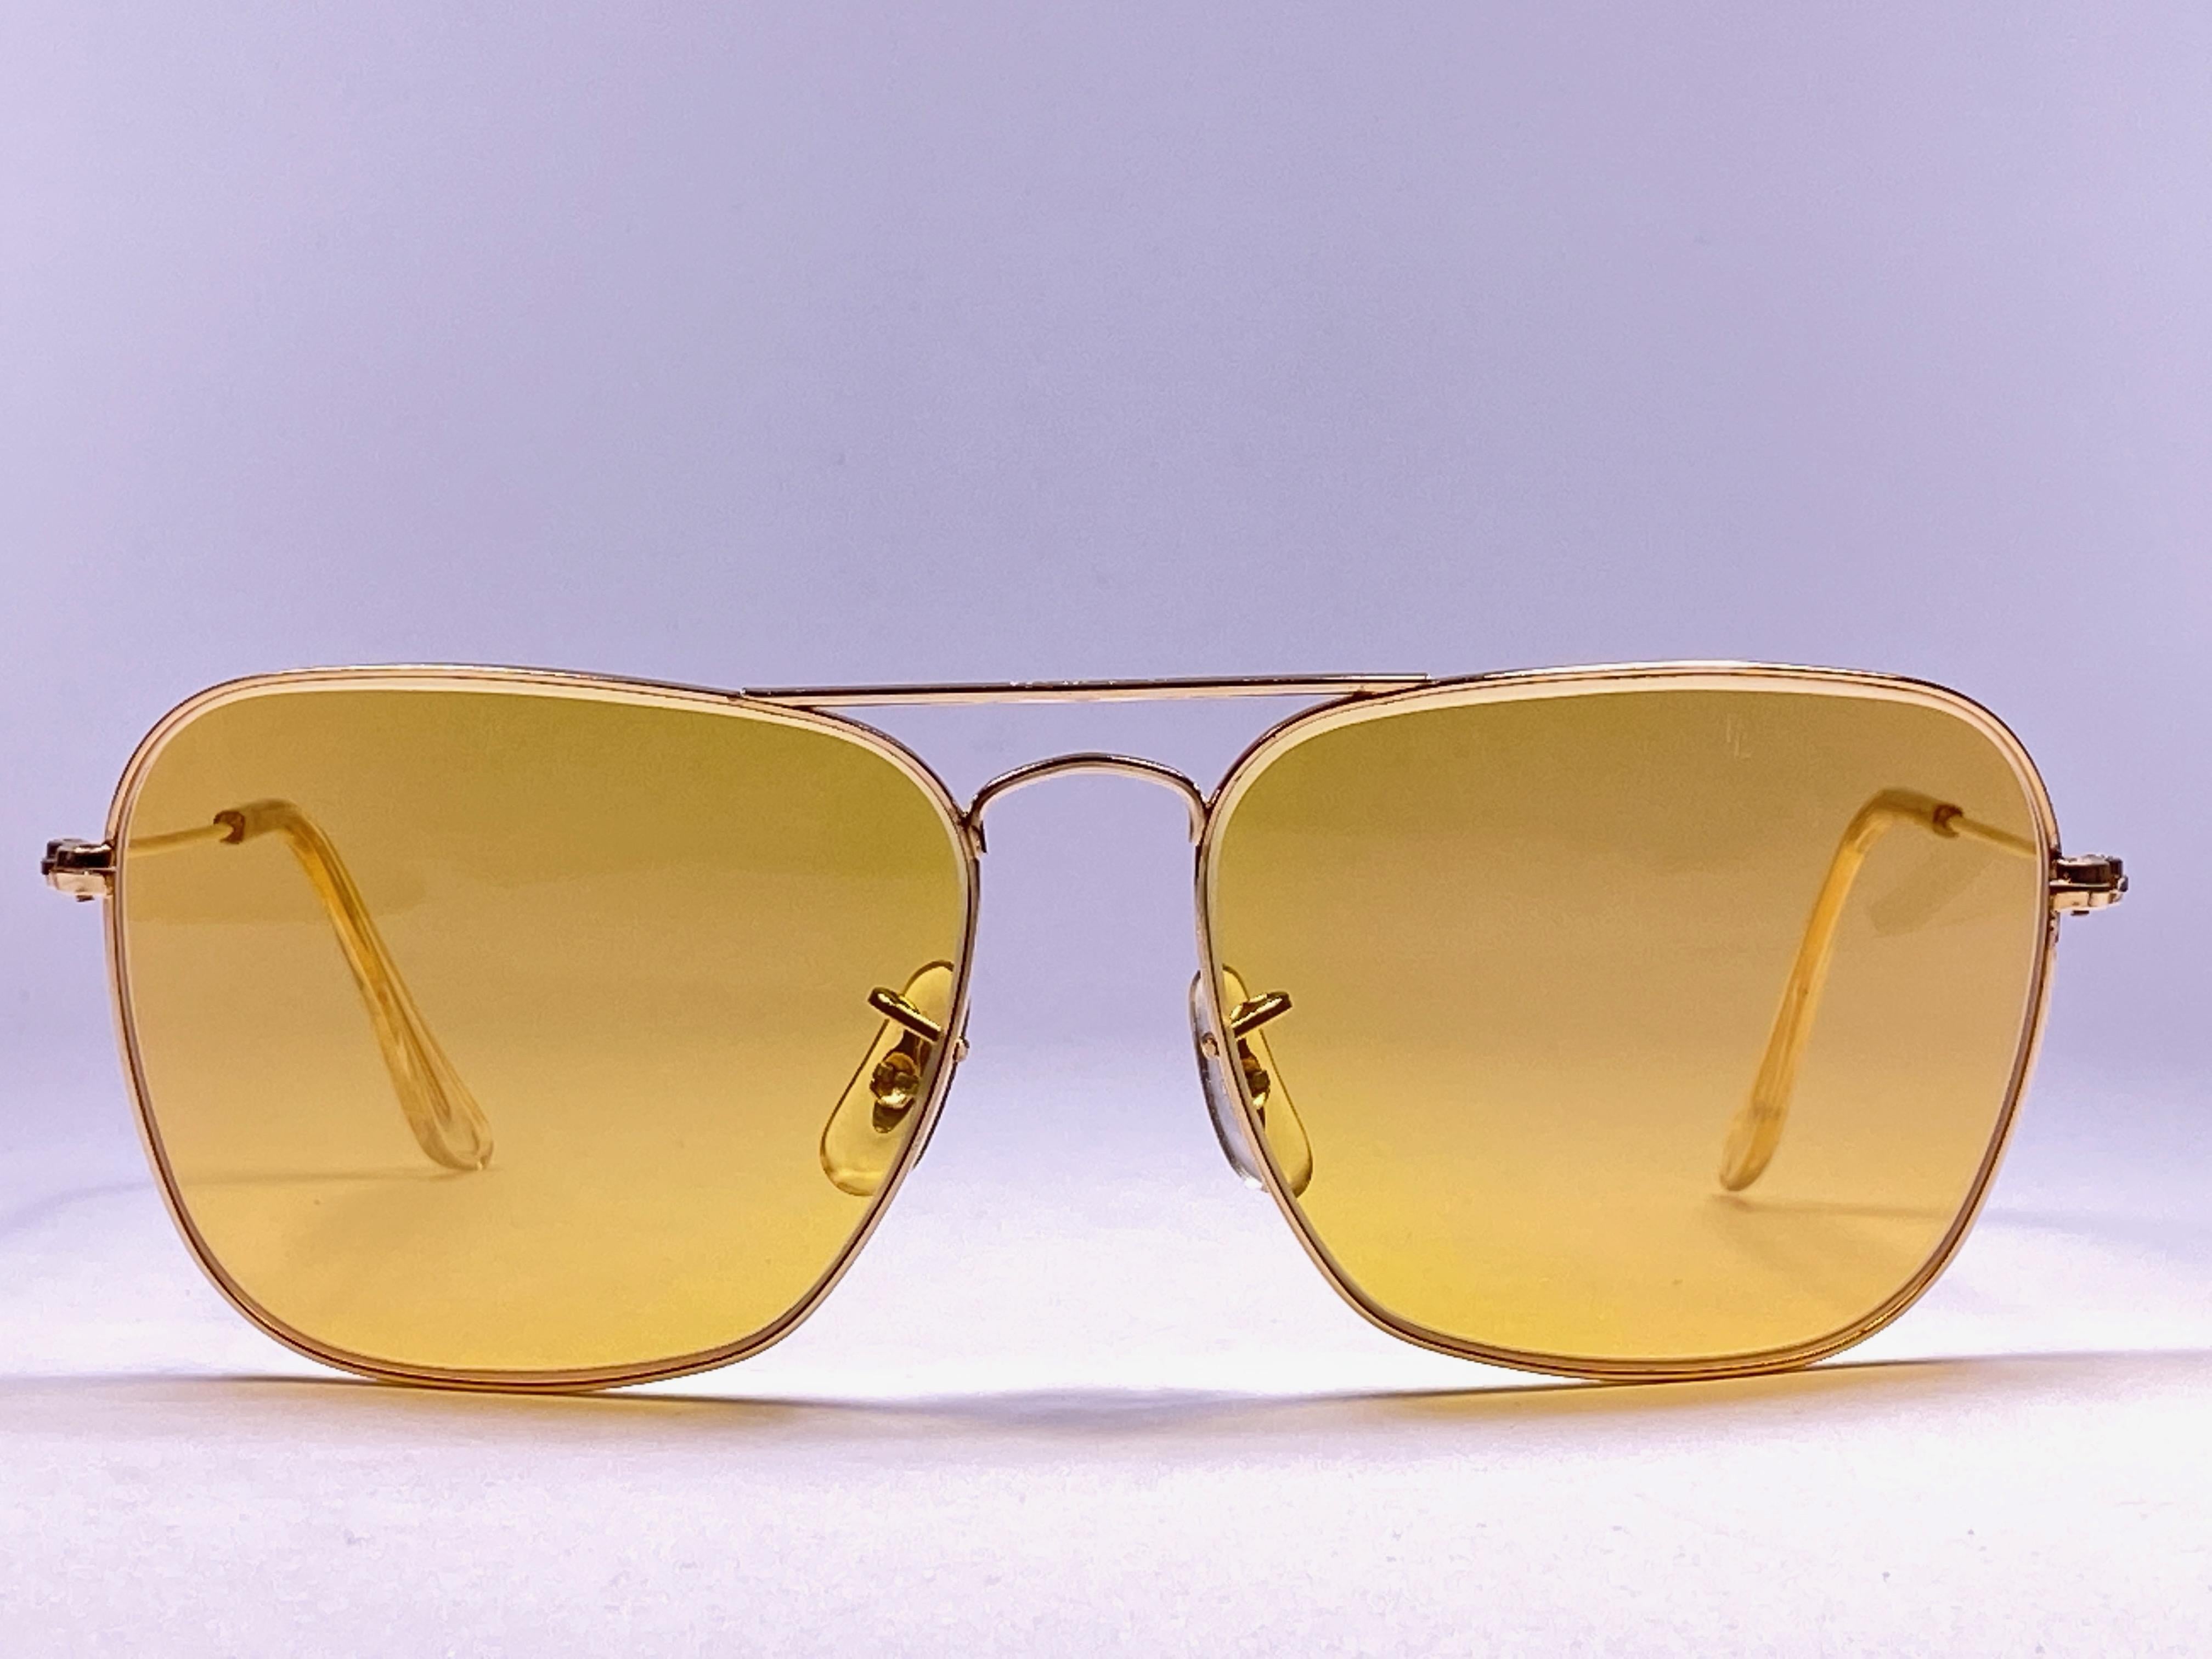 New Vintage Ray Ban Caravan gold plated with Ambermatic lenses. B&L etched on top of the lenses, so mid 1970's.  Please notice this item is nearly 50 years old and may show minor sign of wear due to storage.
Comes with its original Ray Ban B&L